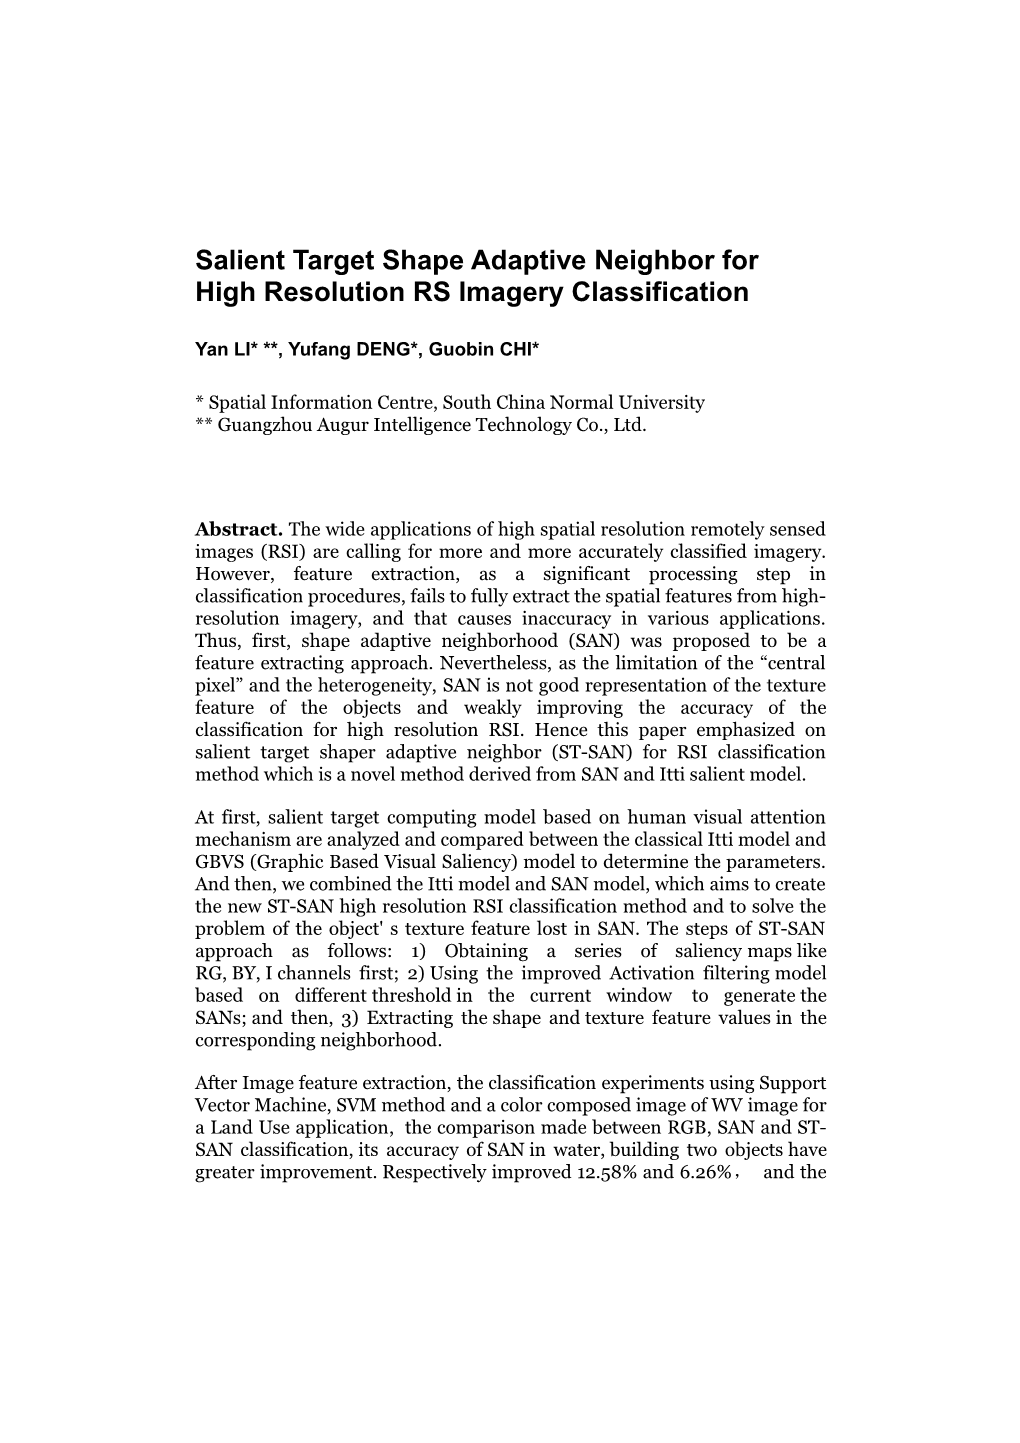 Salient Target Shape Adaptive Neighbor for High Resolutionrs Imagery Classification